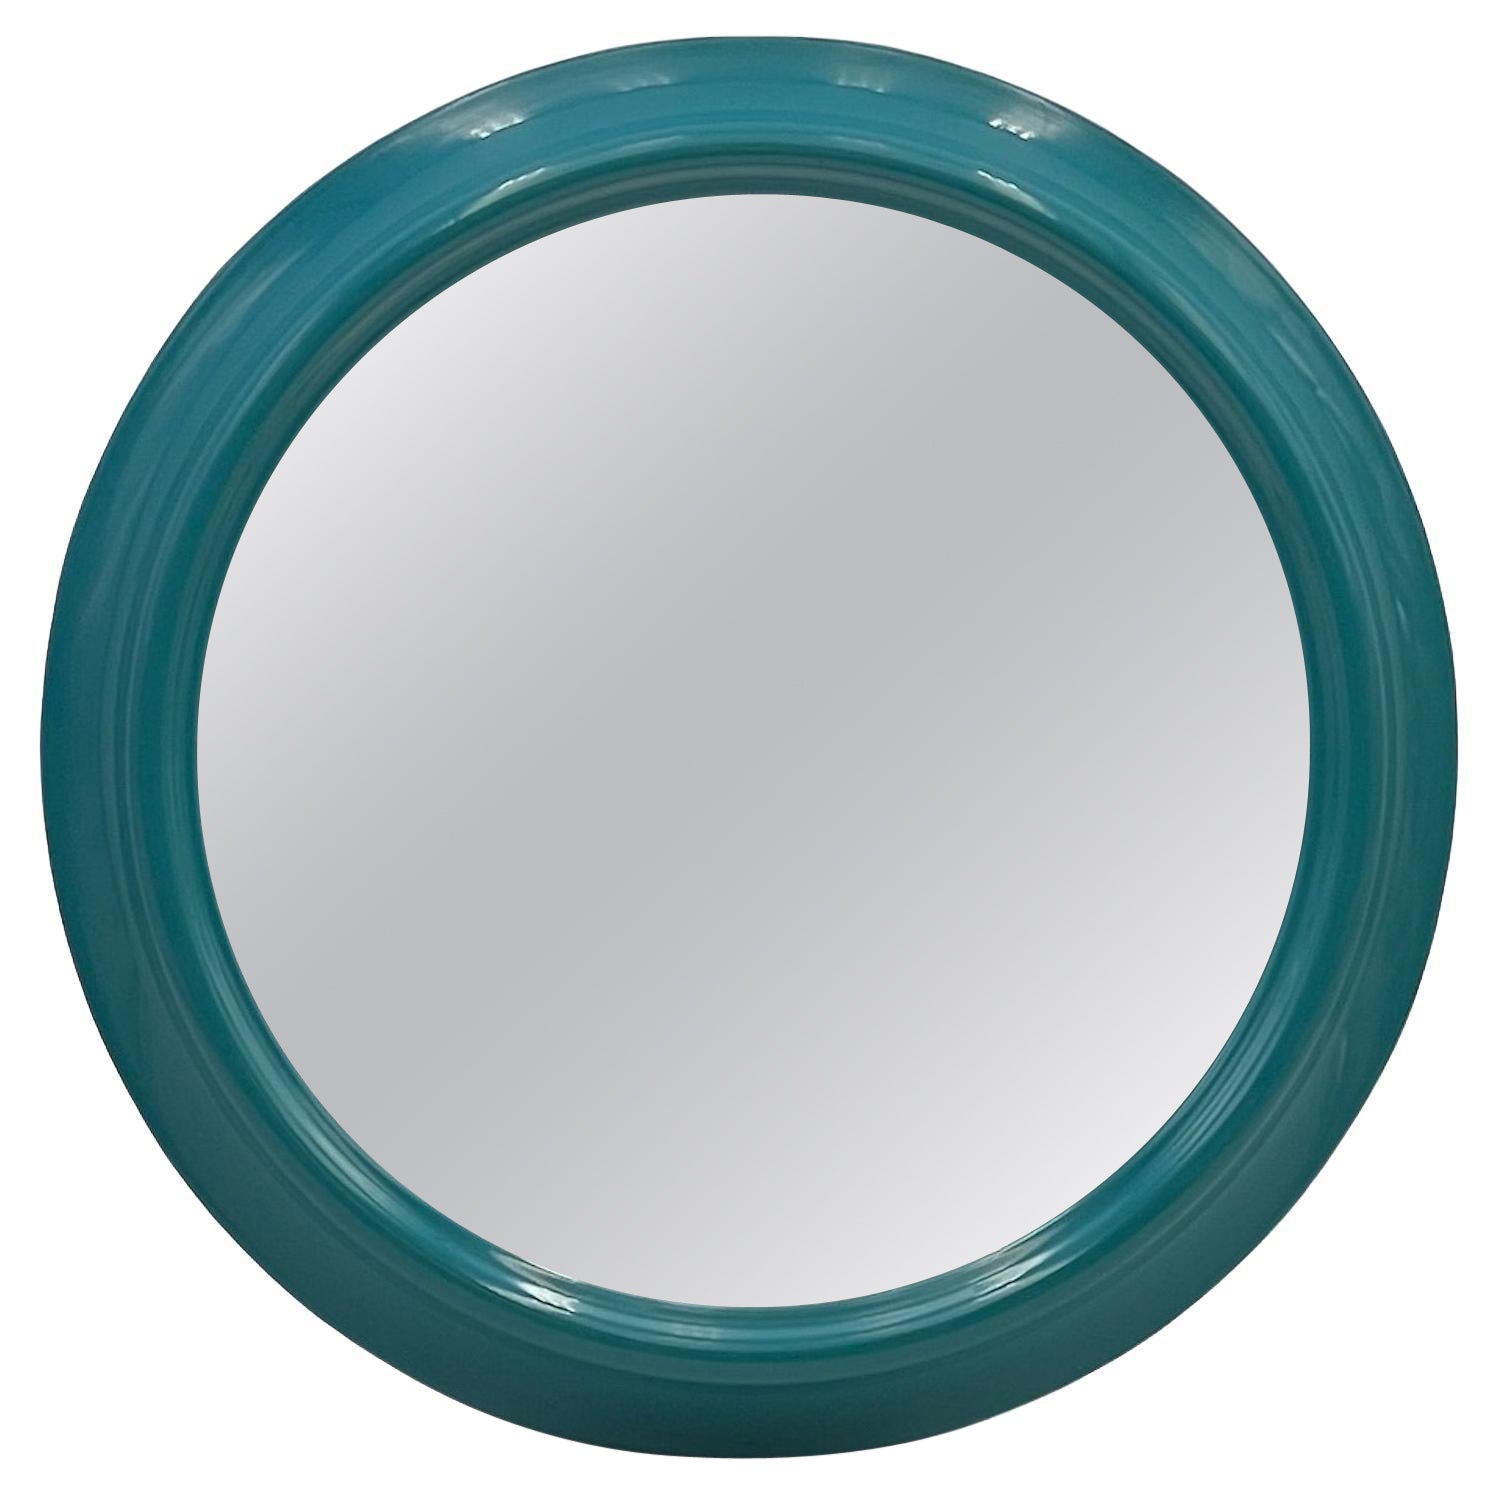 Vintage Round Wall Mirror in Turquoise Blue Made in Italy, 1970s For Sale